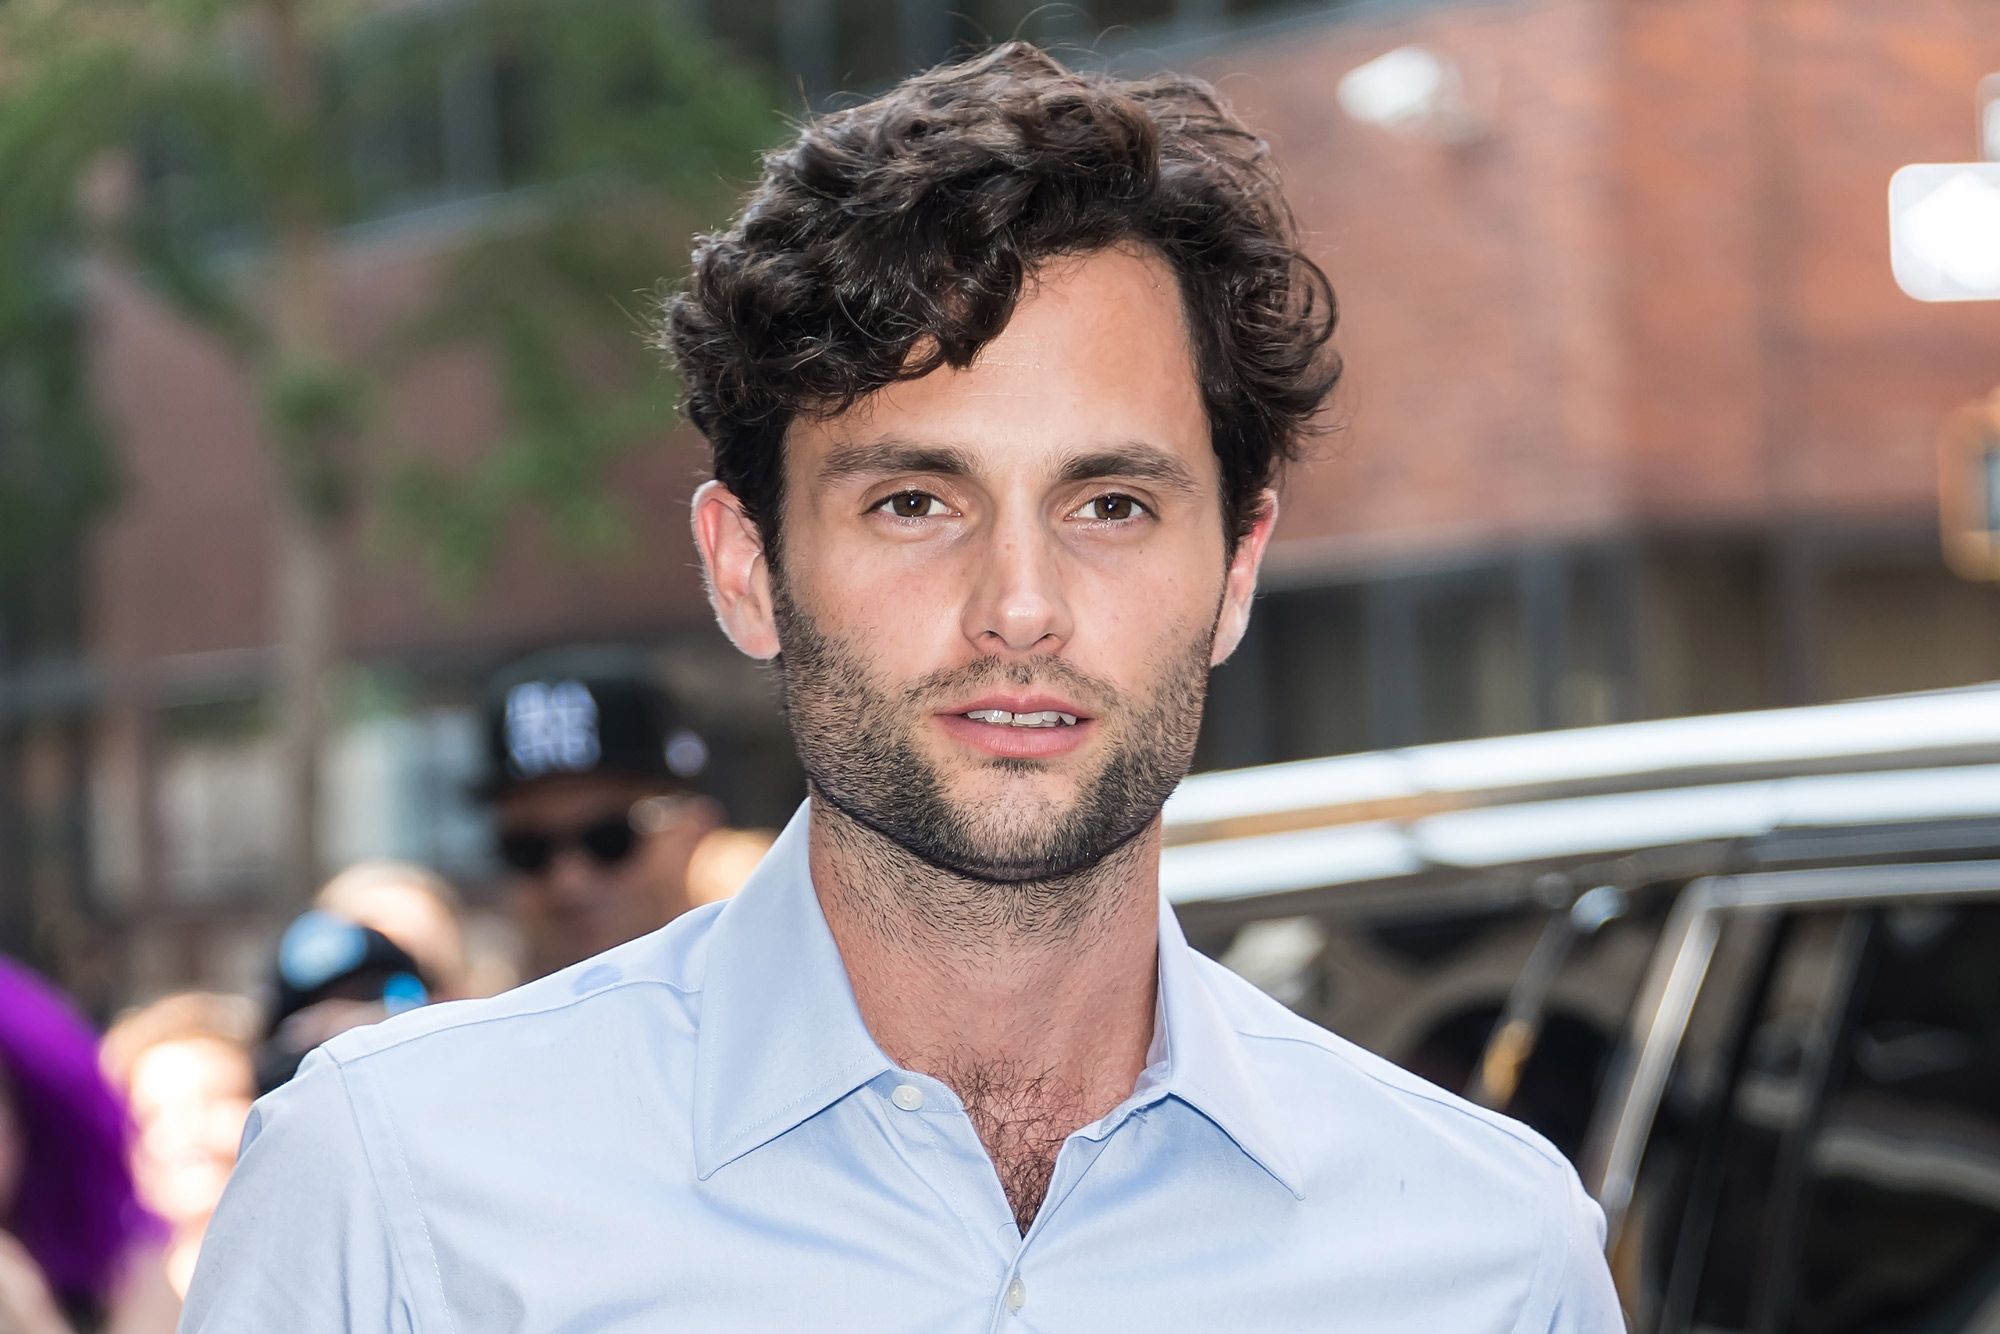 Penn Badgley Wiki, Bio, Age, Net Worth, and Other Facts